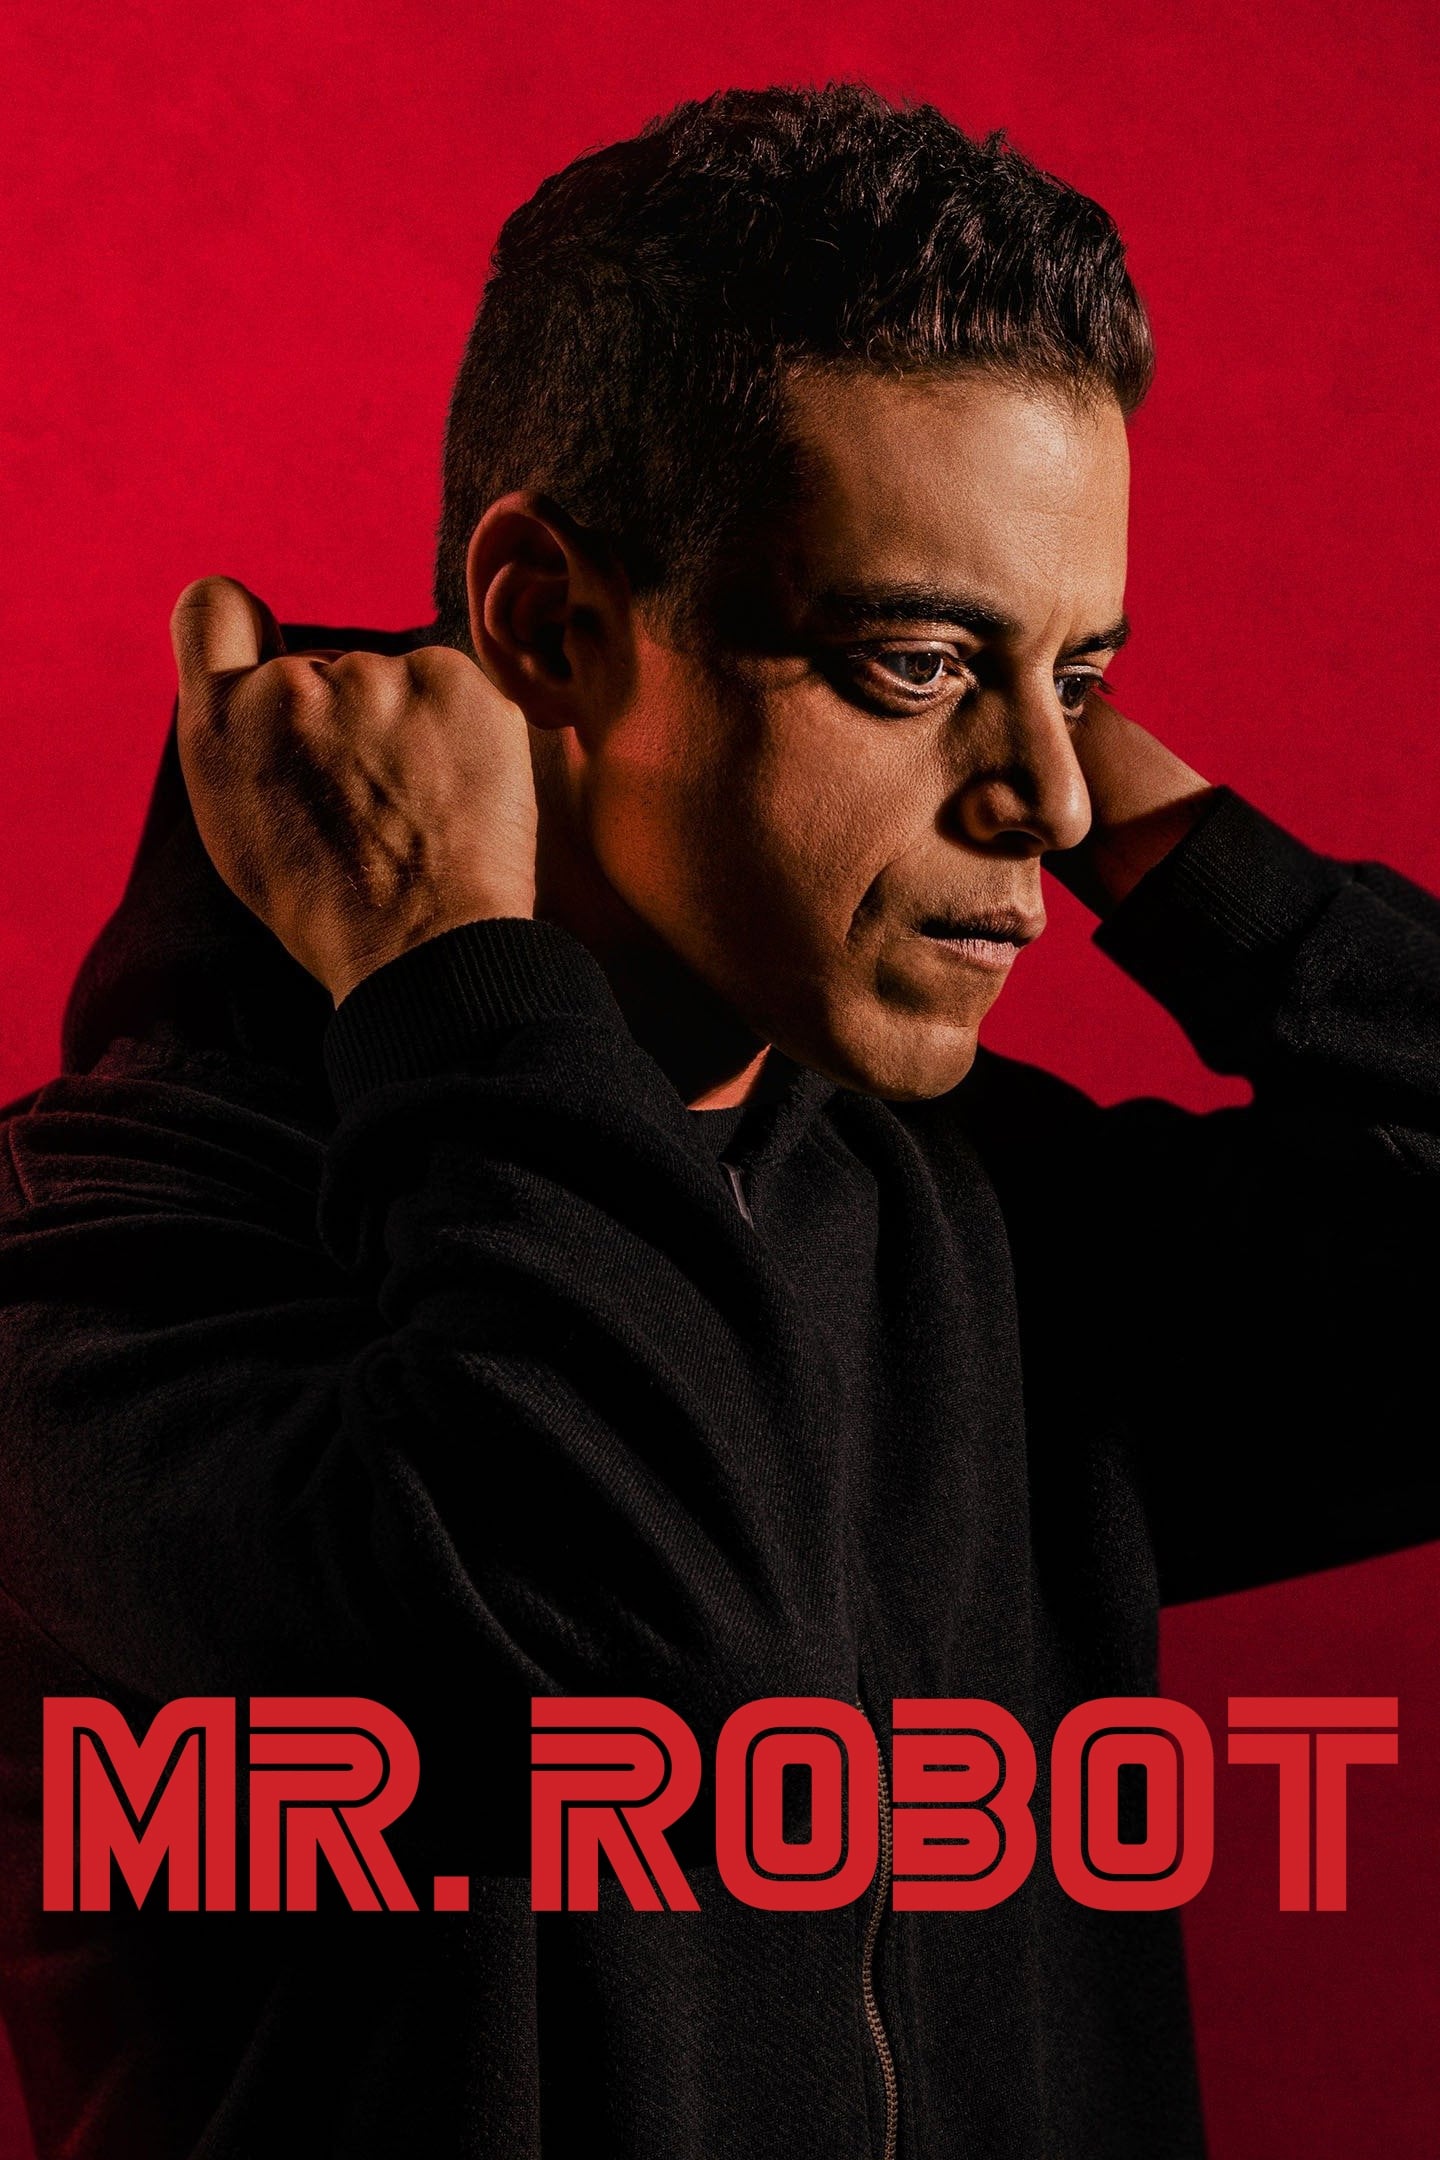 Mr. Robot TV Shows About Social Anxiety